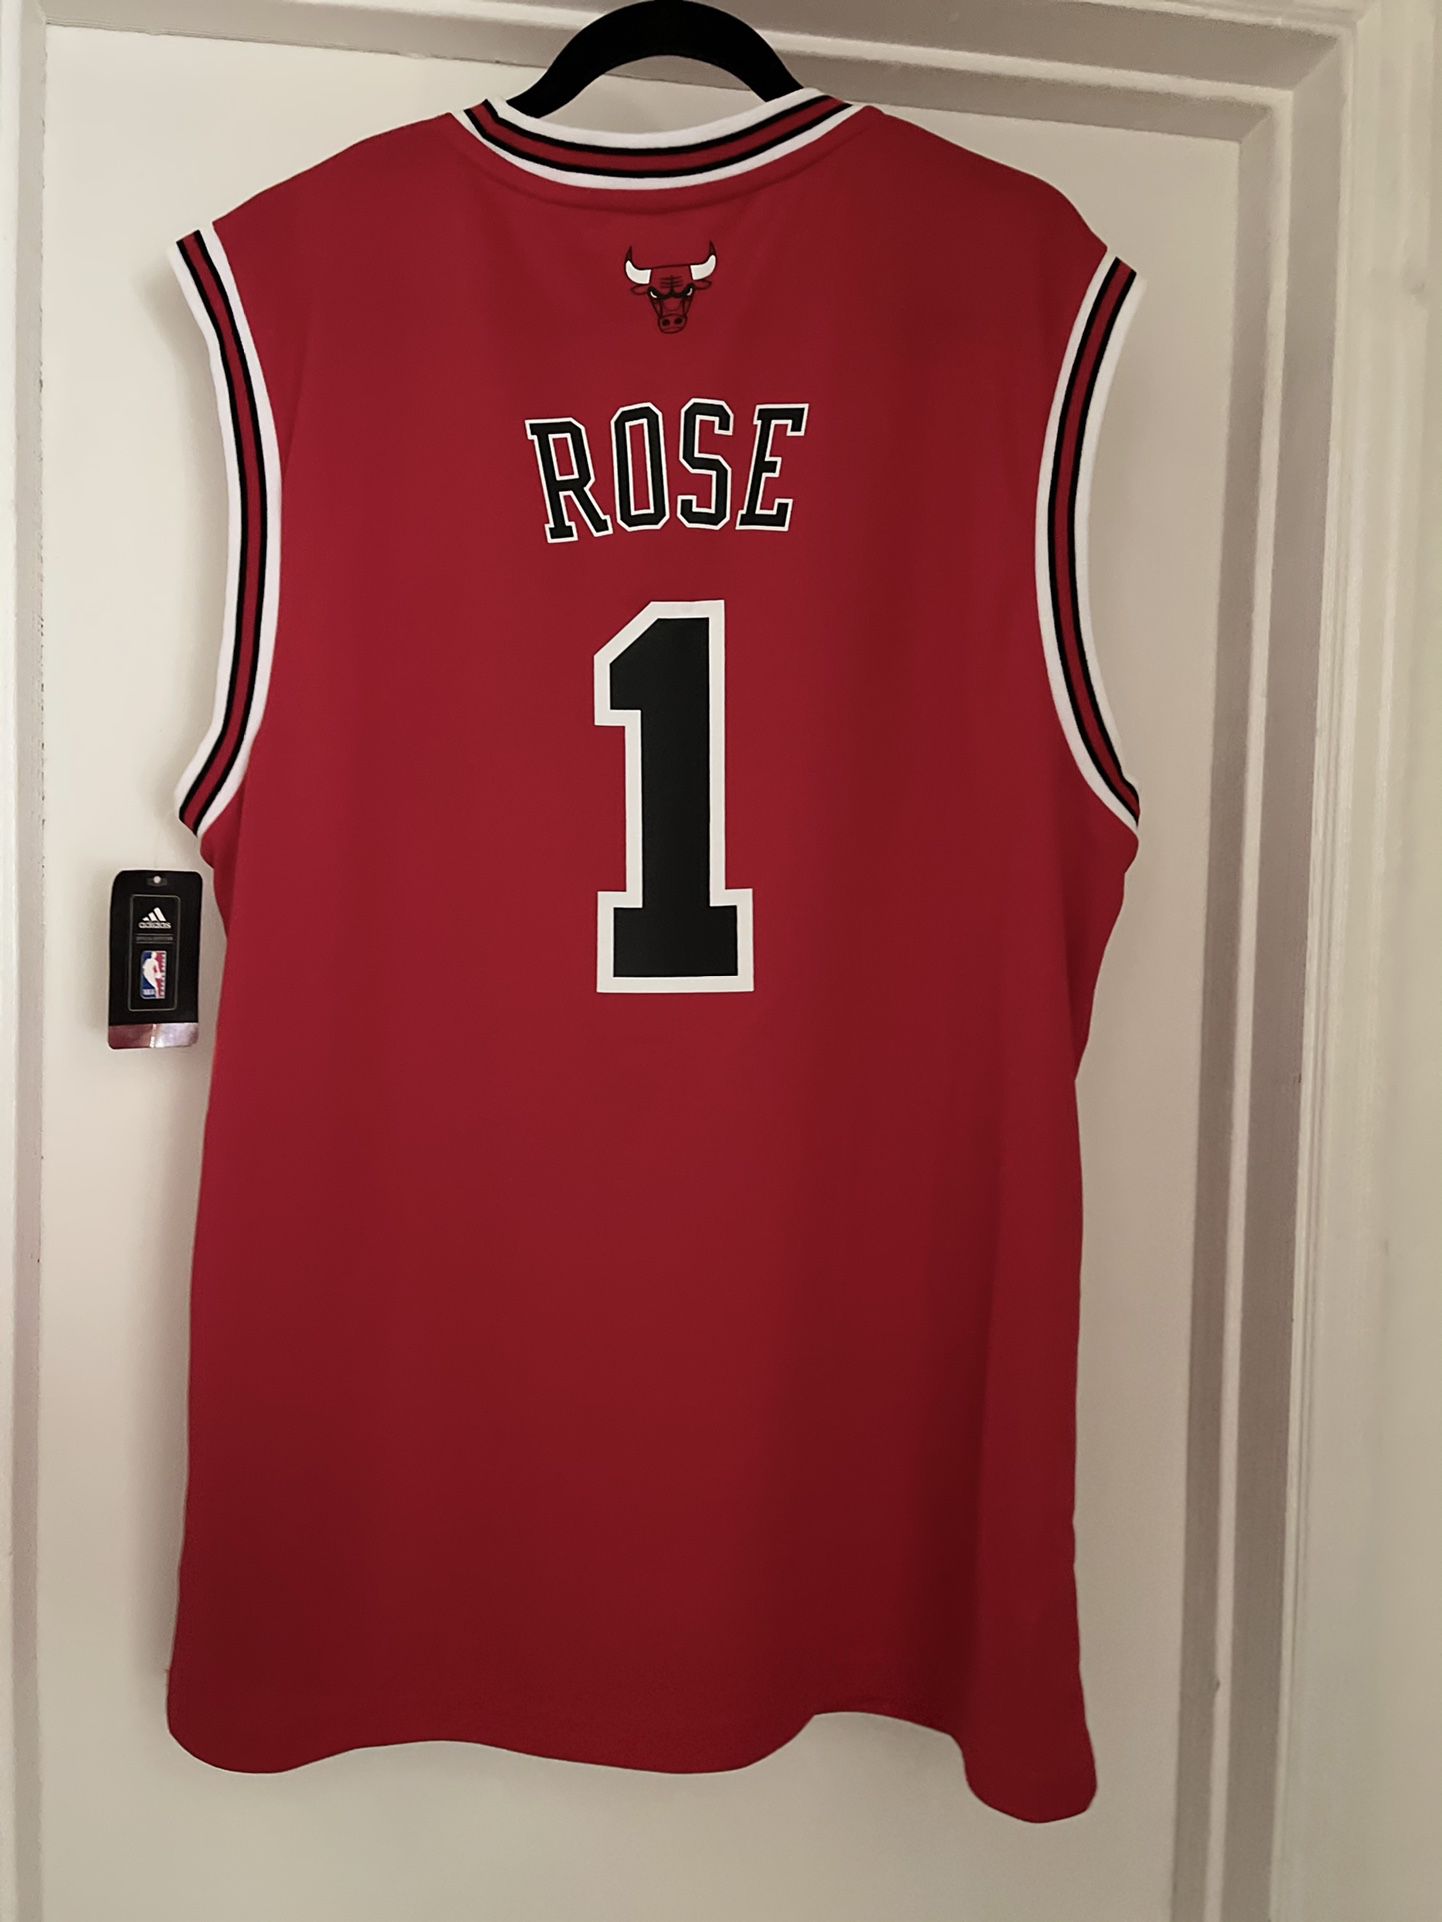 Chicago Bulls “ Derrick Rose” Jersey 100% Authentic for Sale in